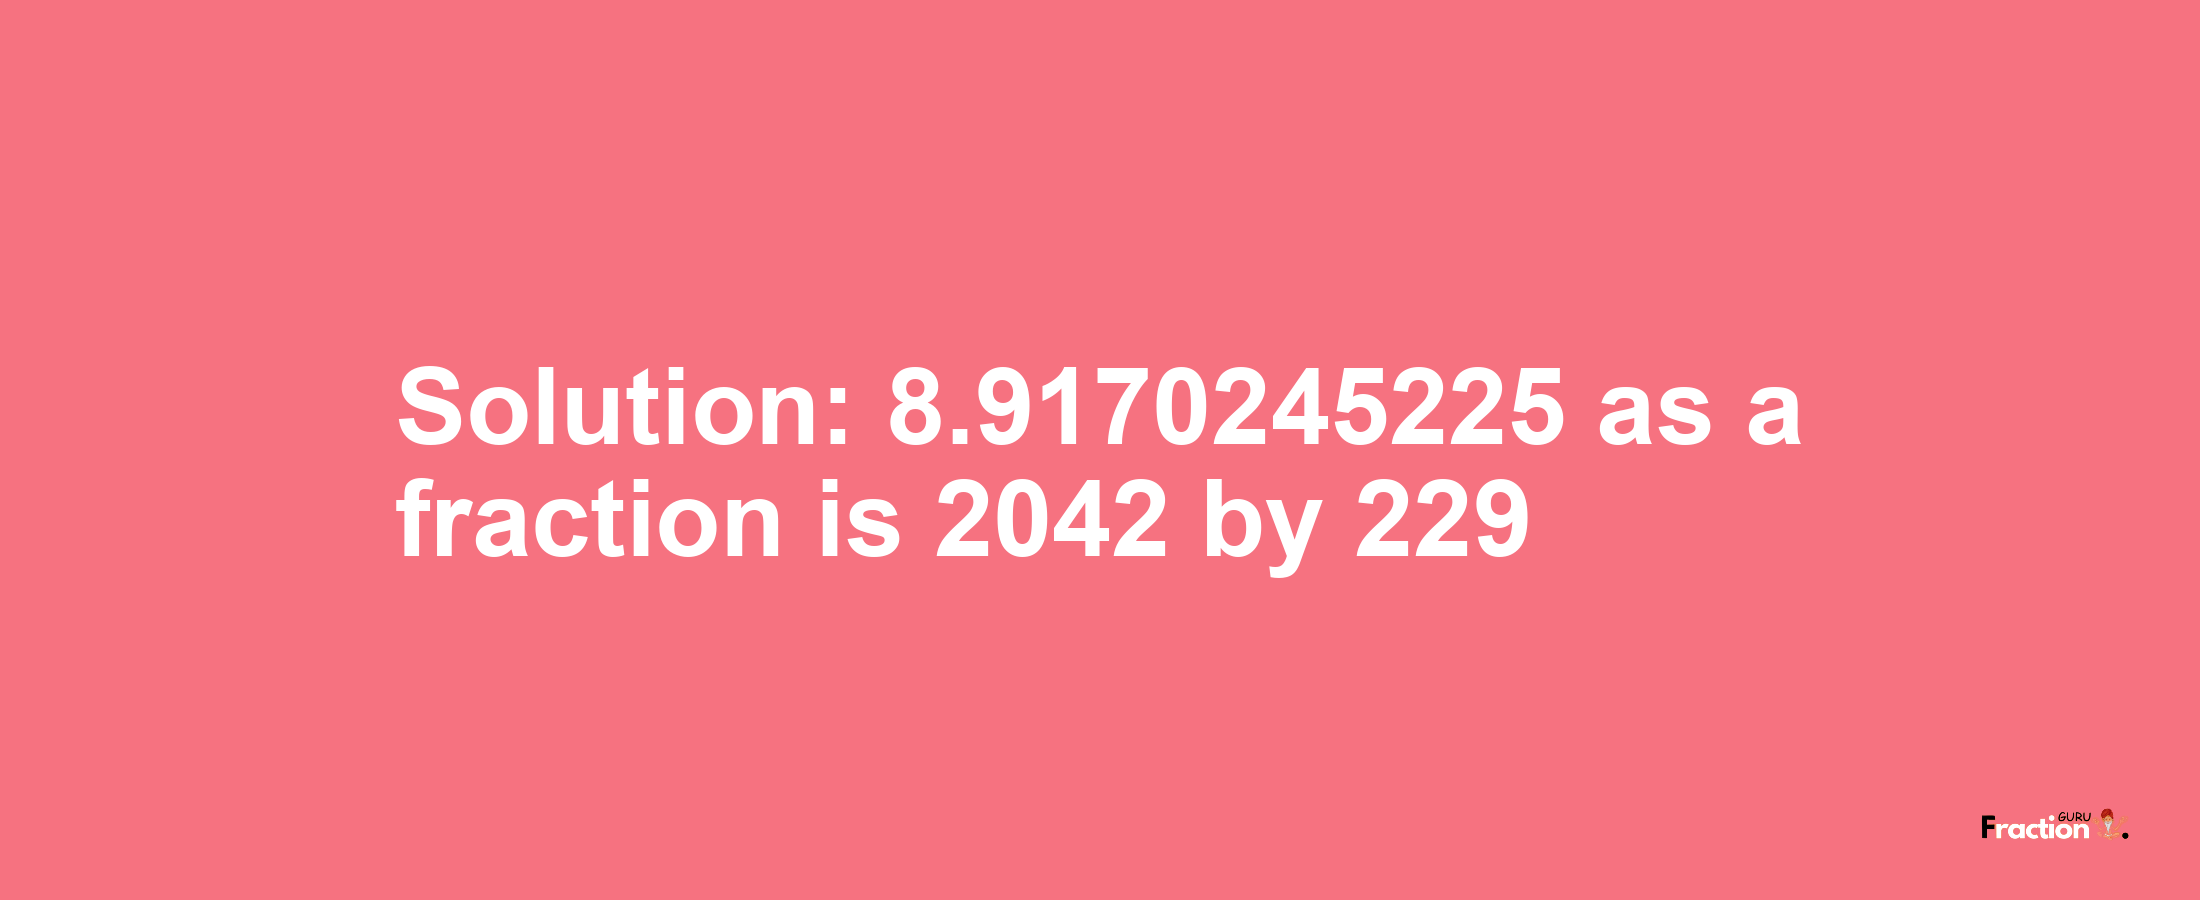 Solution:8.9170245225 as a fraction is 2042/229